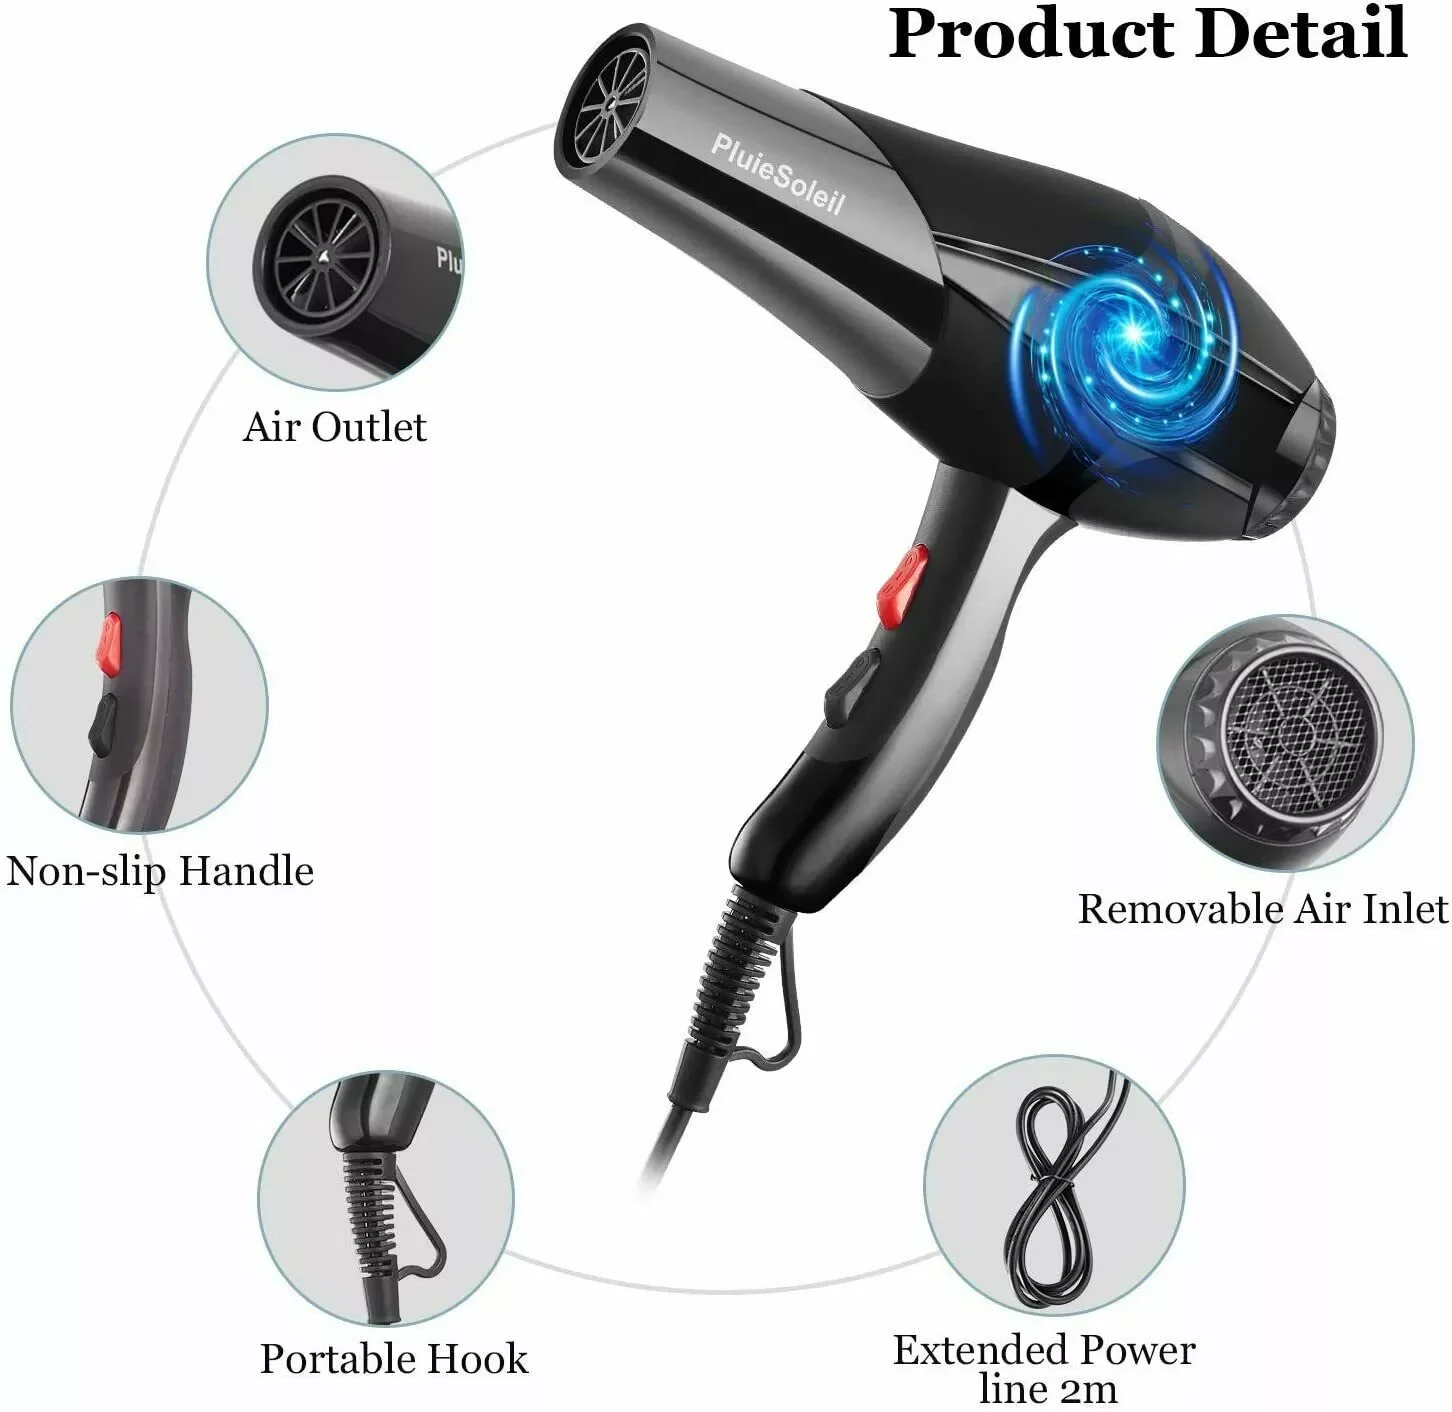 220V Professional Hair Dryer Strong Power Barber Salon Styling Tools Hot Cold Air Blow Dryer For Salons and household EU Plug enlarge